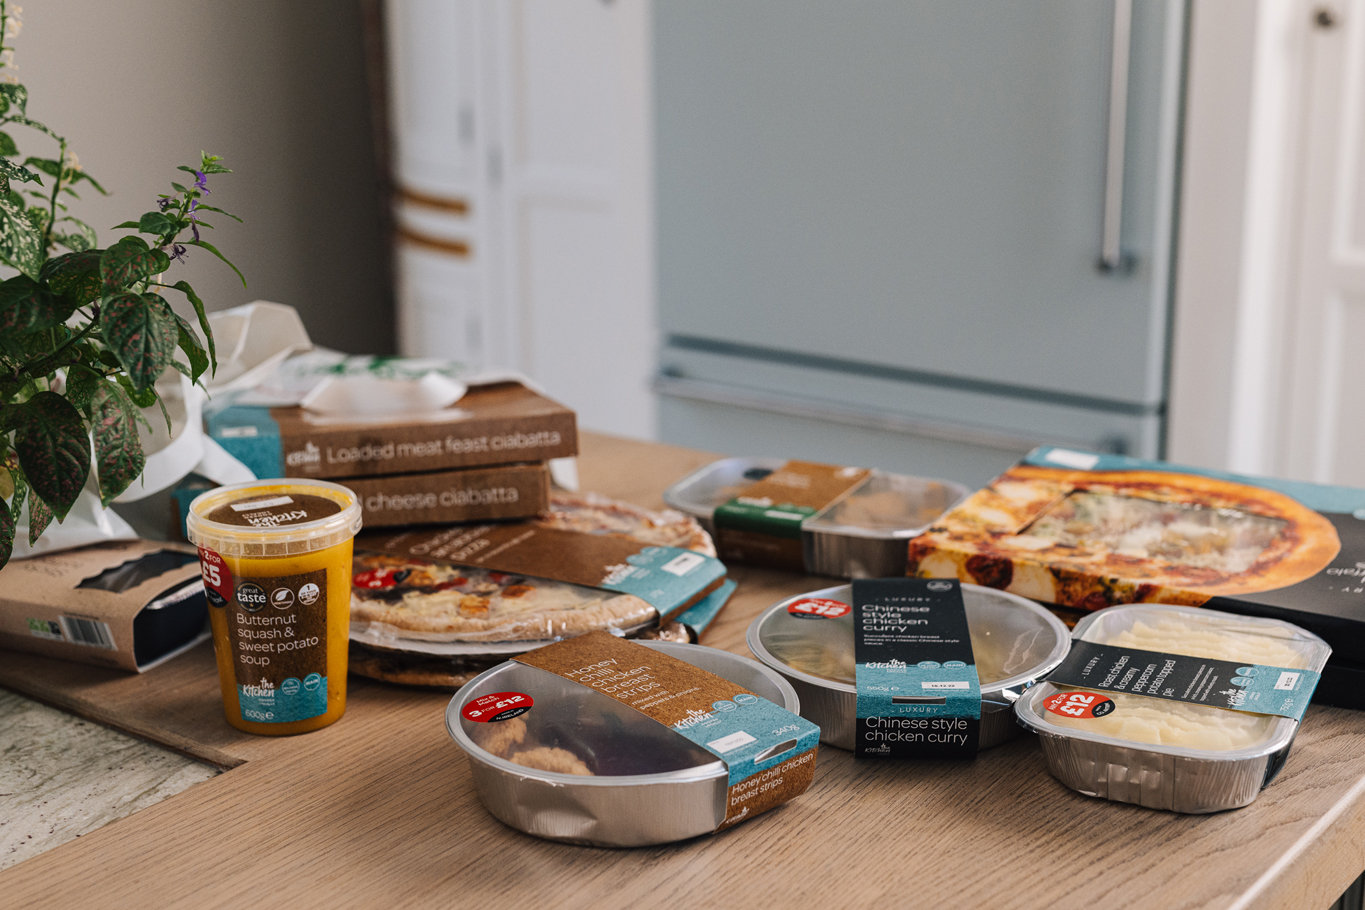 SPAR NI’s ‘The Kitchen’ own-brand meals aligns following big investment